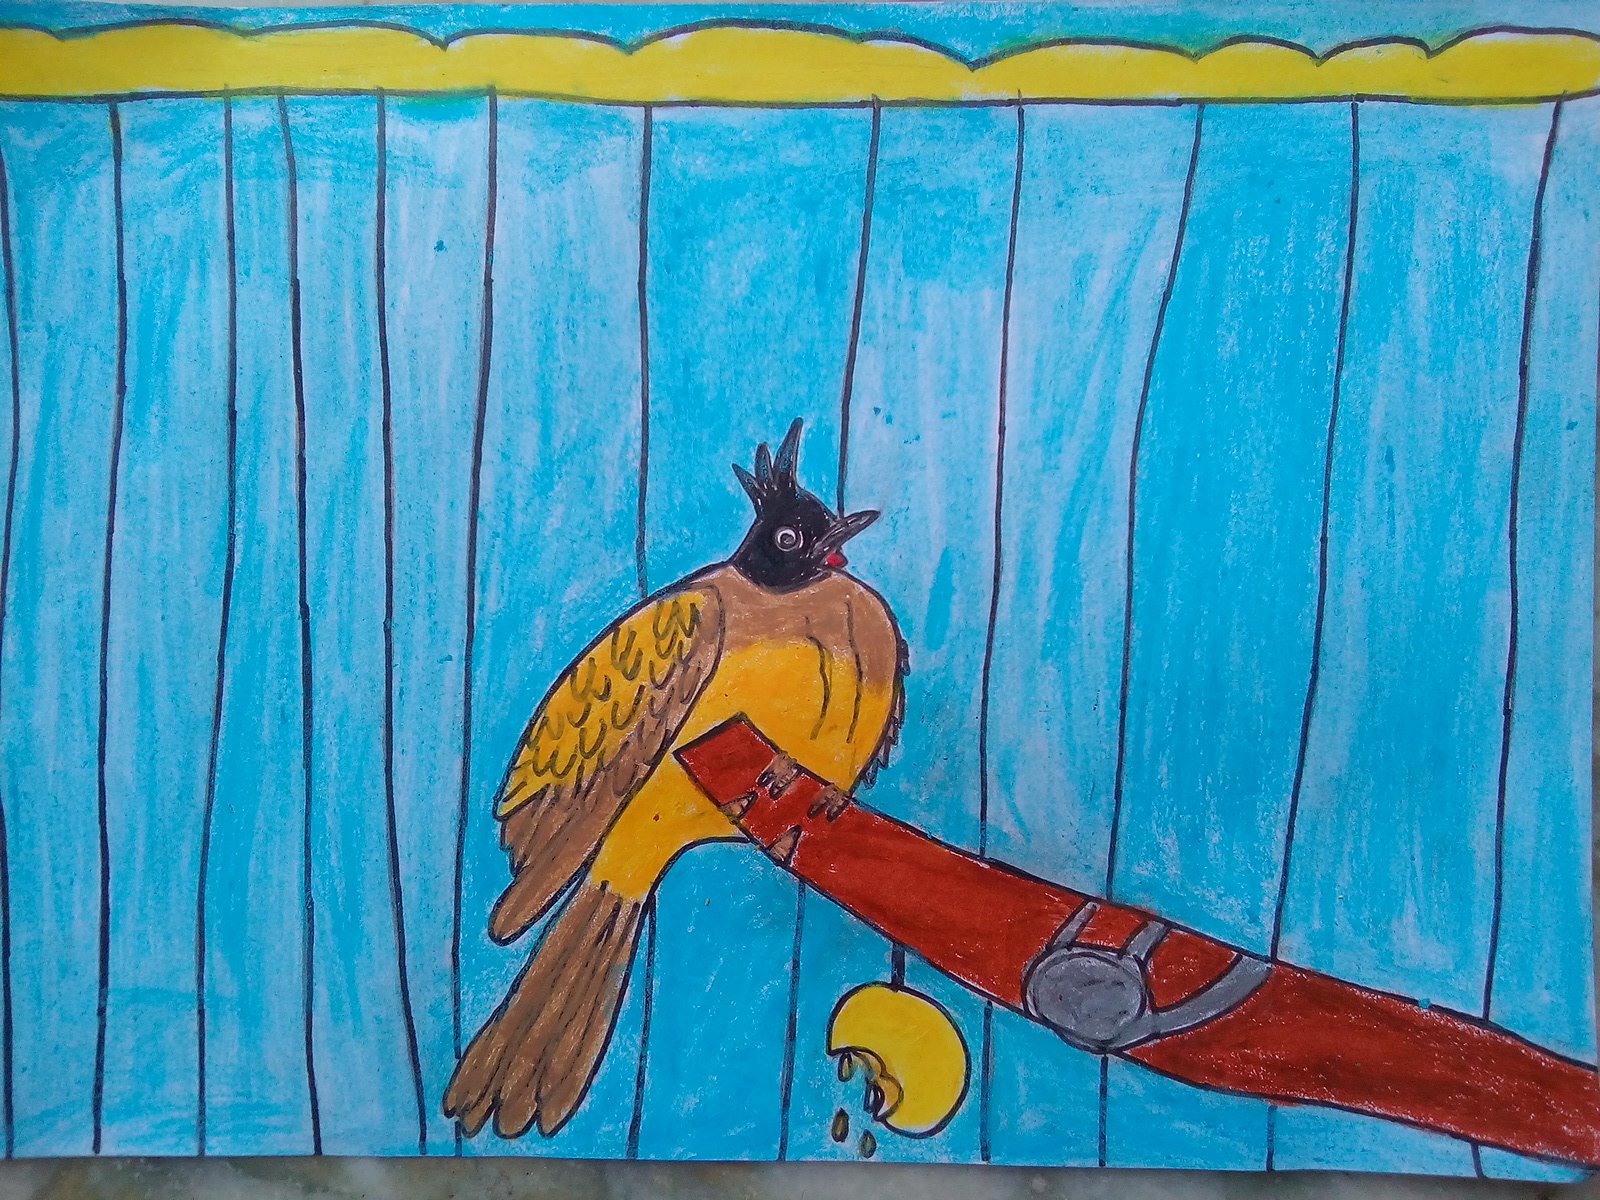 BULBUL IN THE CAGE(Message- Do not put birds in the cage) - JOHN ( JOHN ART Gallery 2019).